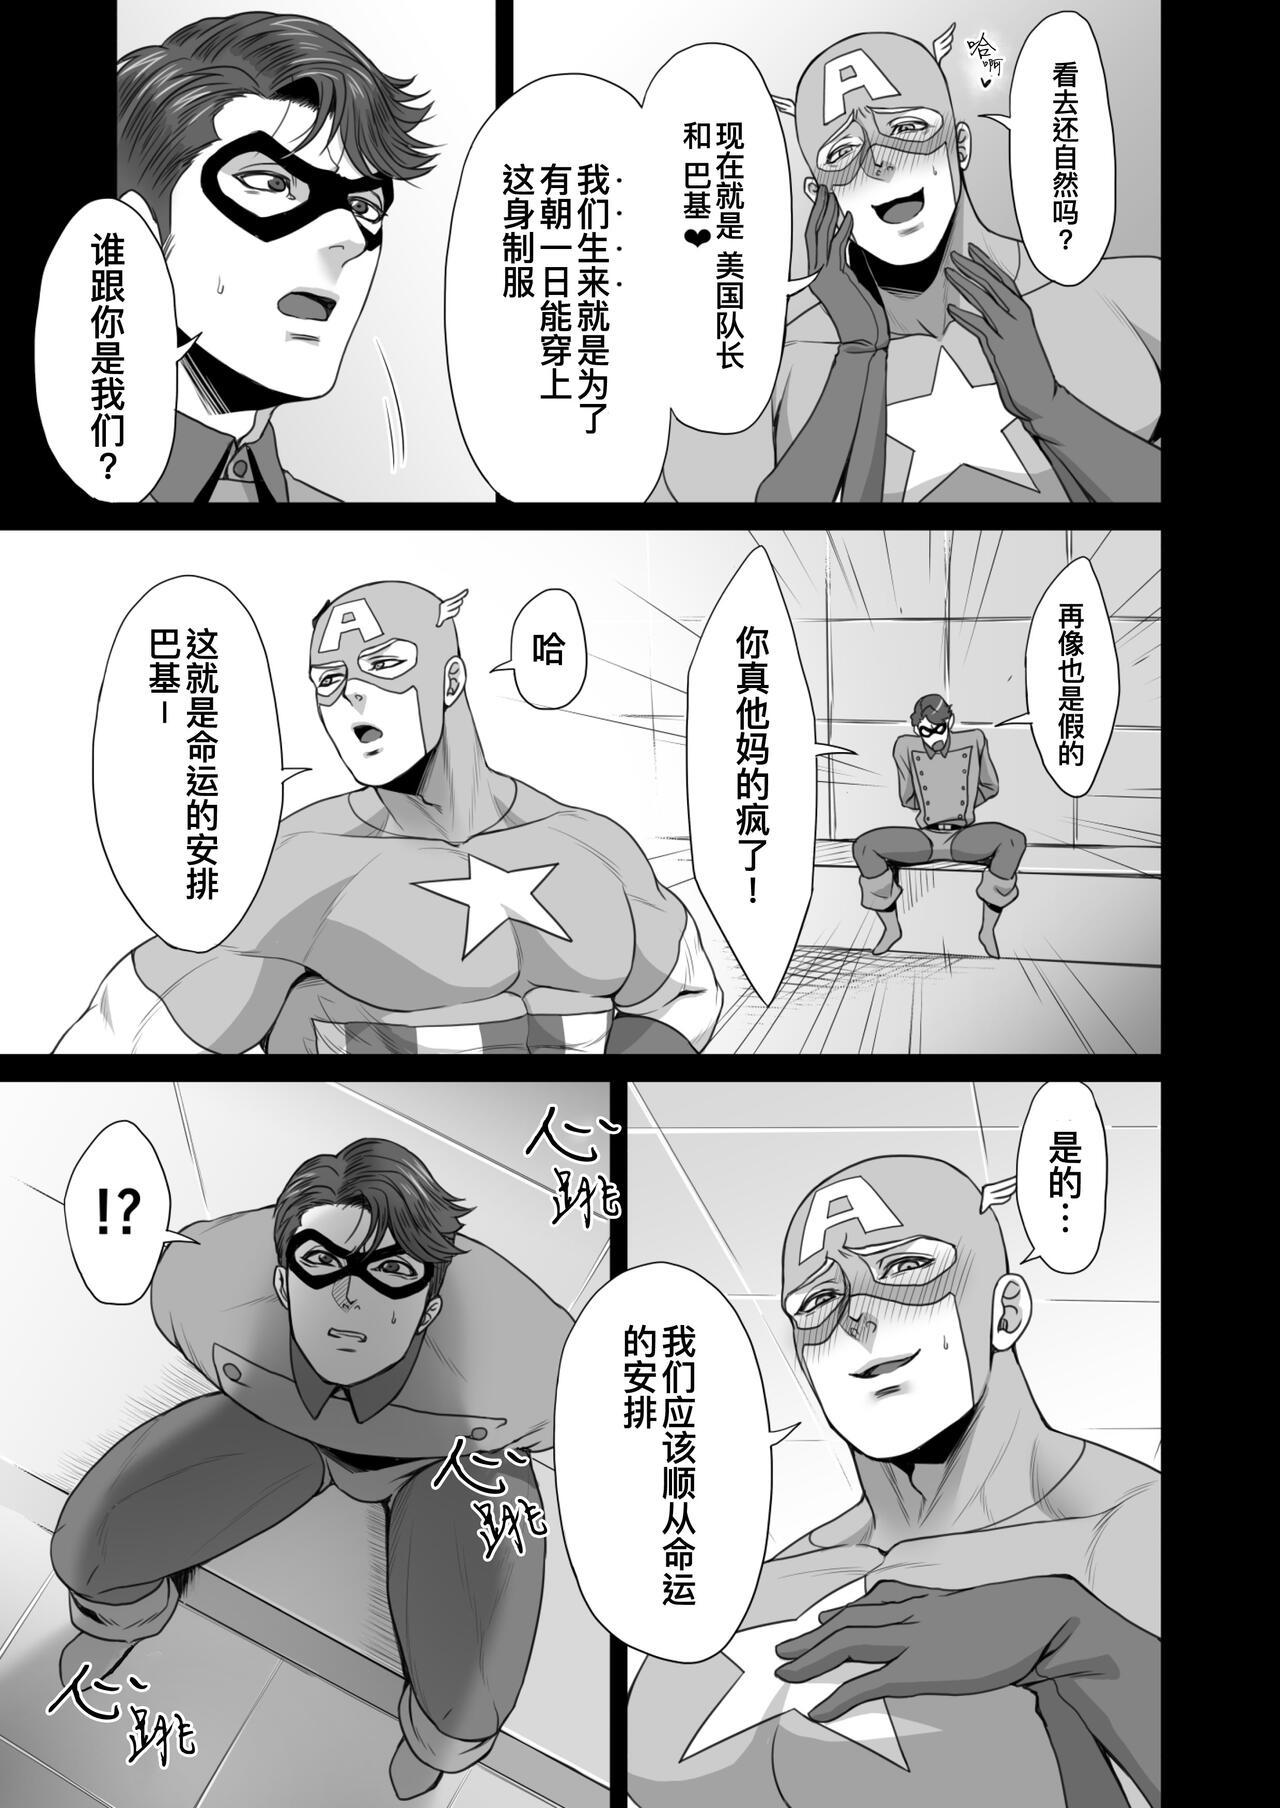 American NO HEROES Our love and hate relationship | 不再需要英雄 - 关于我们之间的爱恨情仇 - Avengers Fake Tits - Page 7